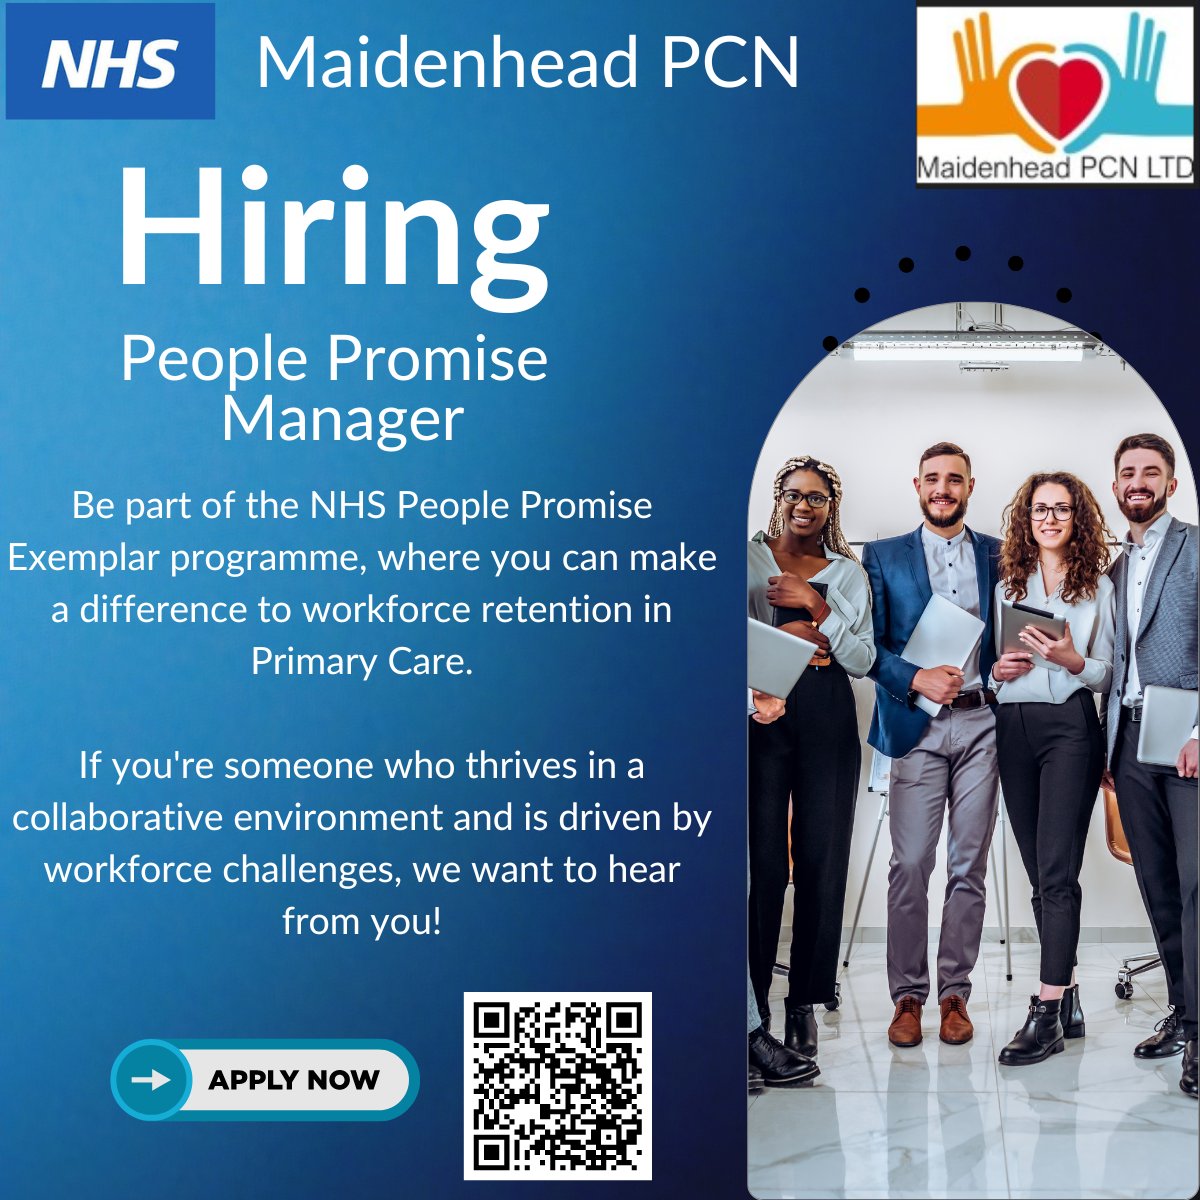 Vacancy alert🌟 Be a key player in delivering the NHS People Promise plan in this new role, People Promise Manager with Maidenhead PCN. ow.ly/8ynF50RhjWe 💼 Expertise: HR/Workforce/OD Specialist 🕒 Working Pattern: Full-time, Flexible #HRSpecialist #PeoplePromise